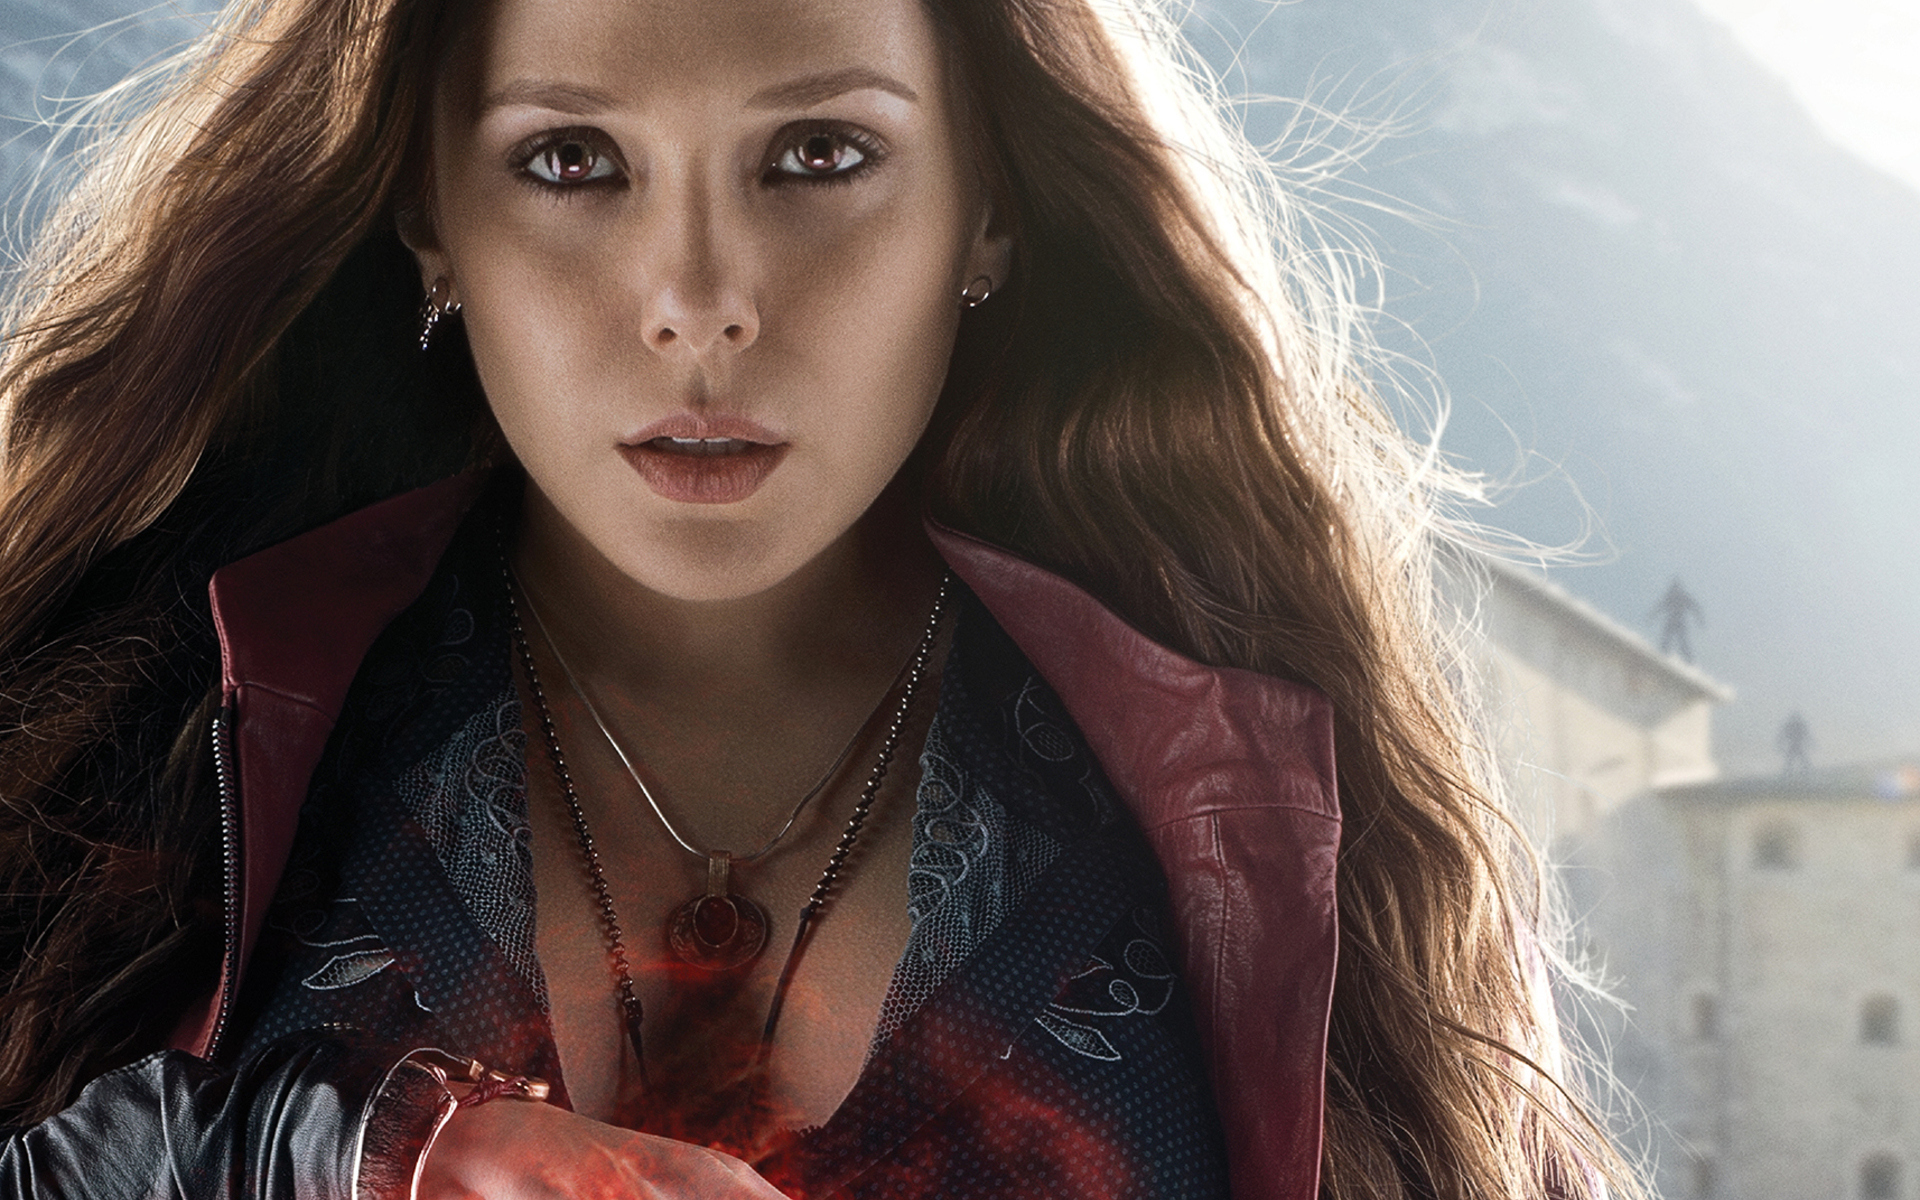 earrings, avengers, elizabeth olsen, long hair, magic, movie, avengers: age of ultron, necklace, red eyes, redhead, scarlet witch, the avengers images